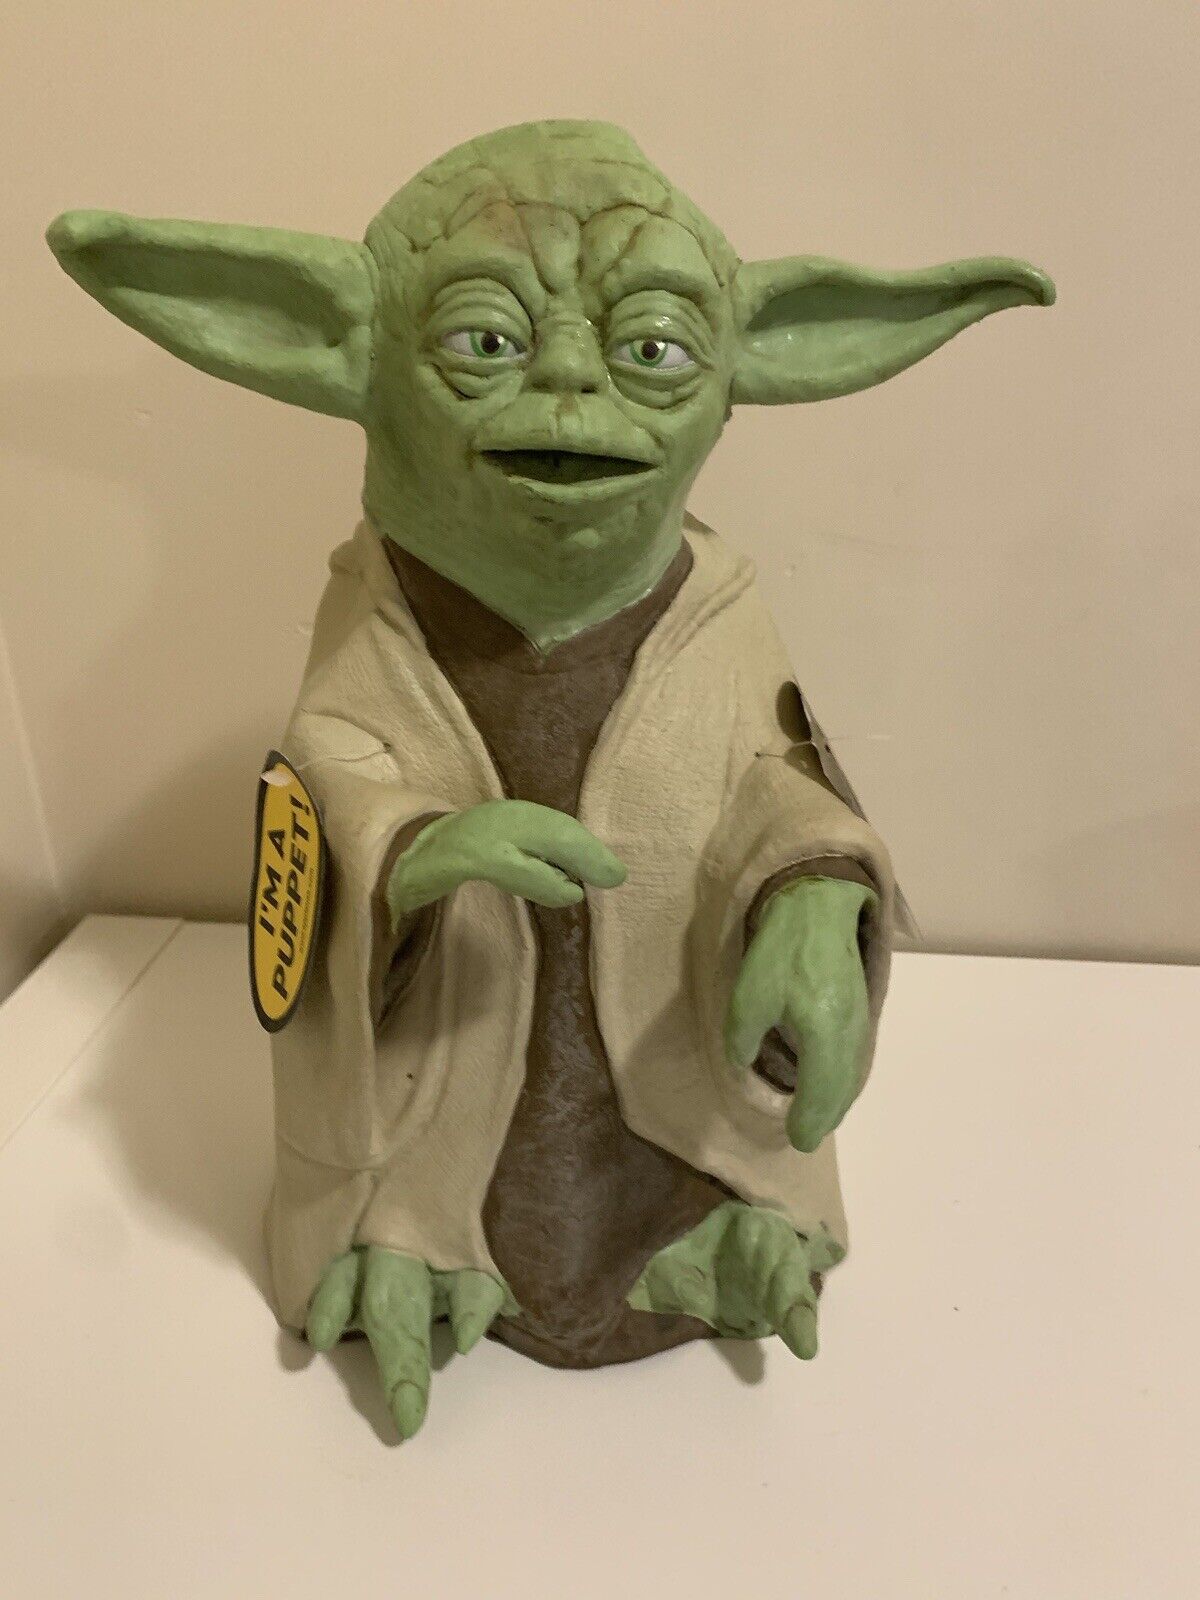 1999 Star Wars Episode 1 Applause Yoda 13” Hand Puppet Latex NWT 1999